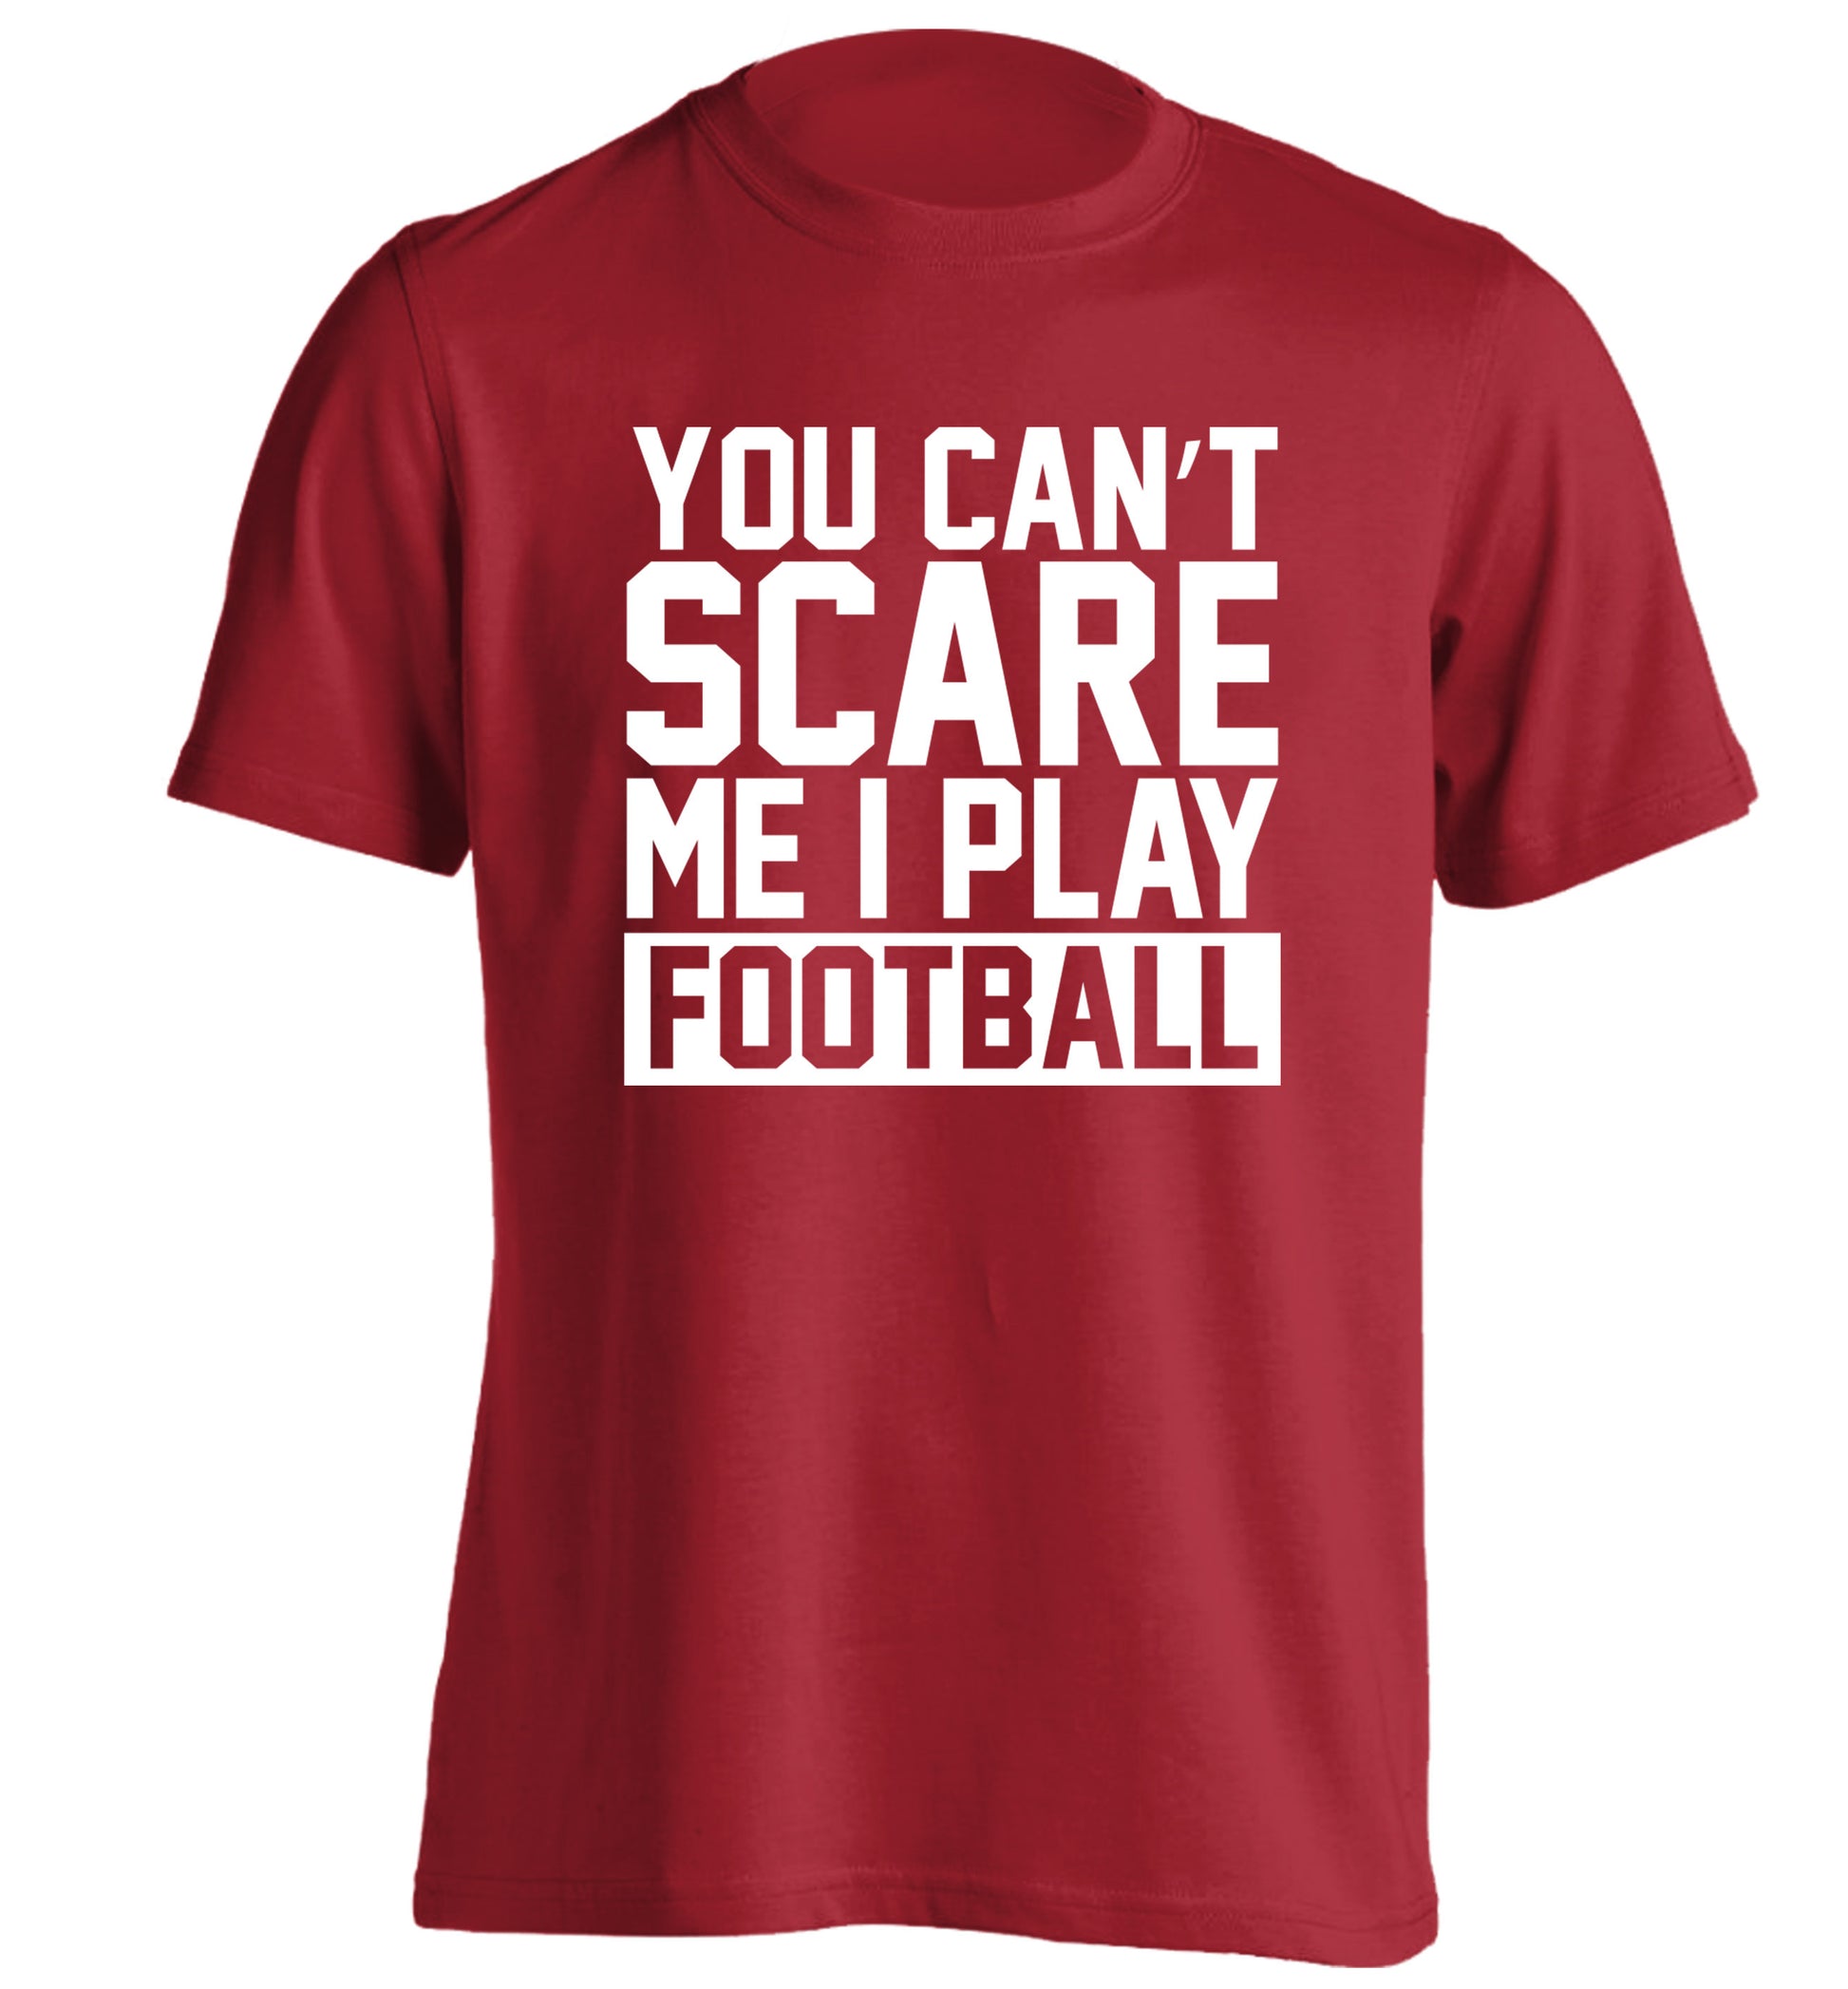 You can't scare me I play football adults unisex red Tshirt 2XL